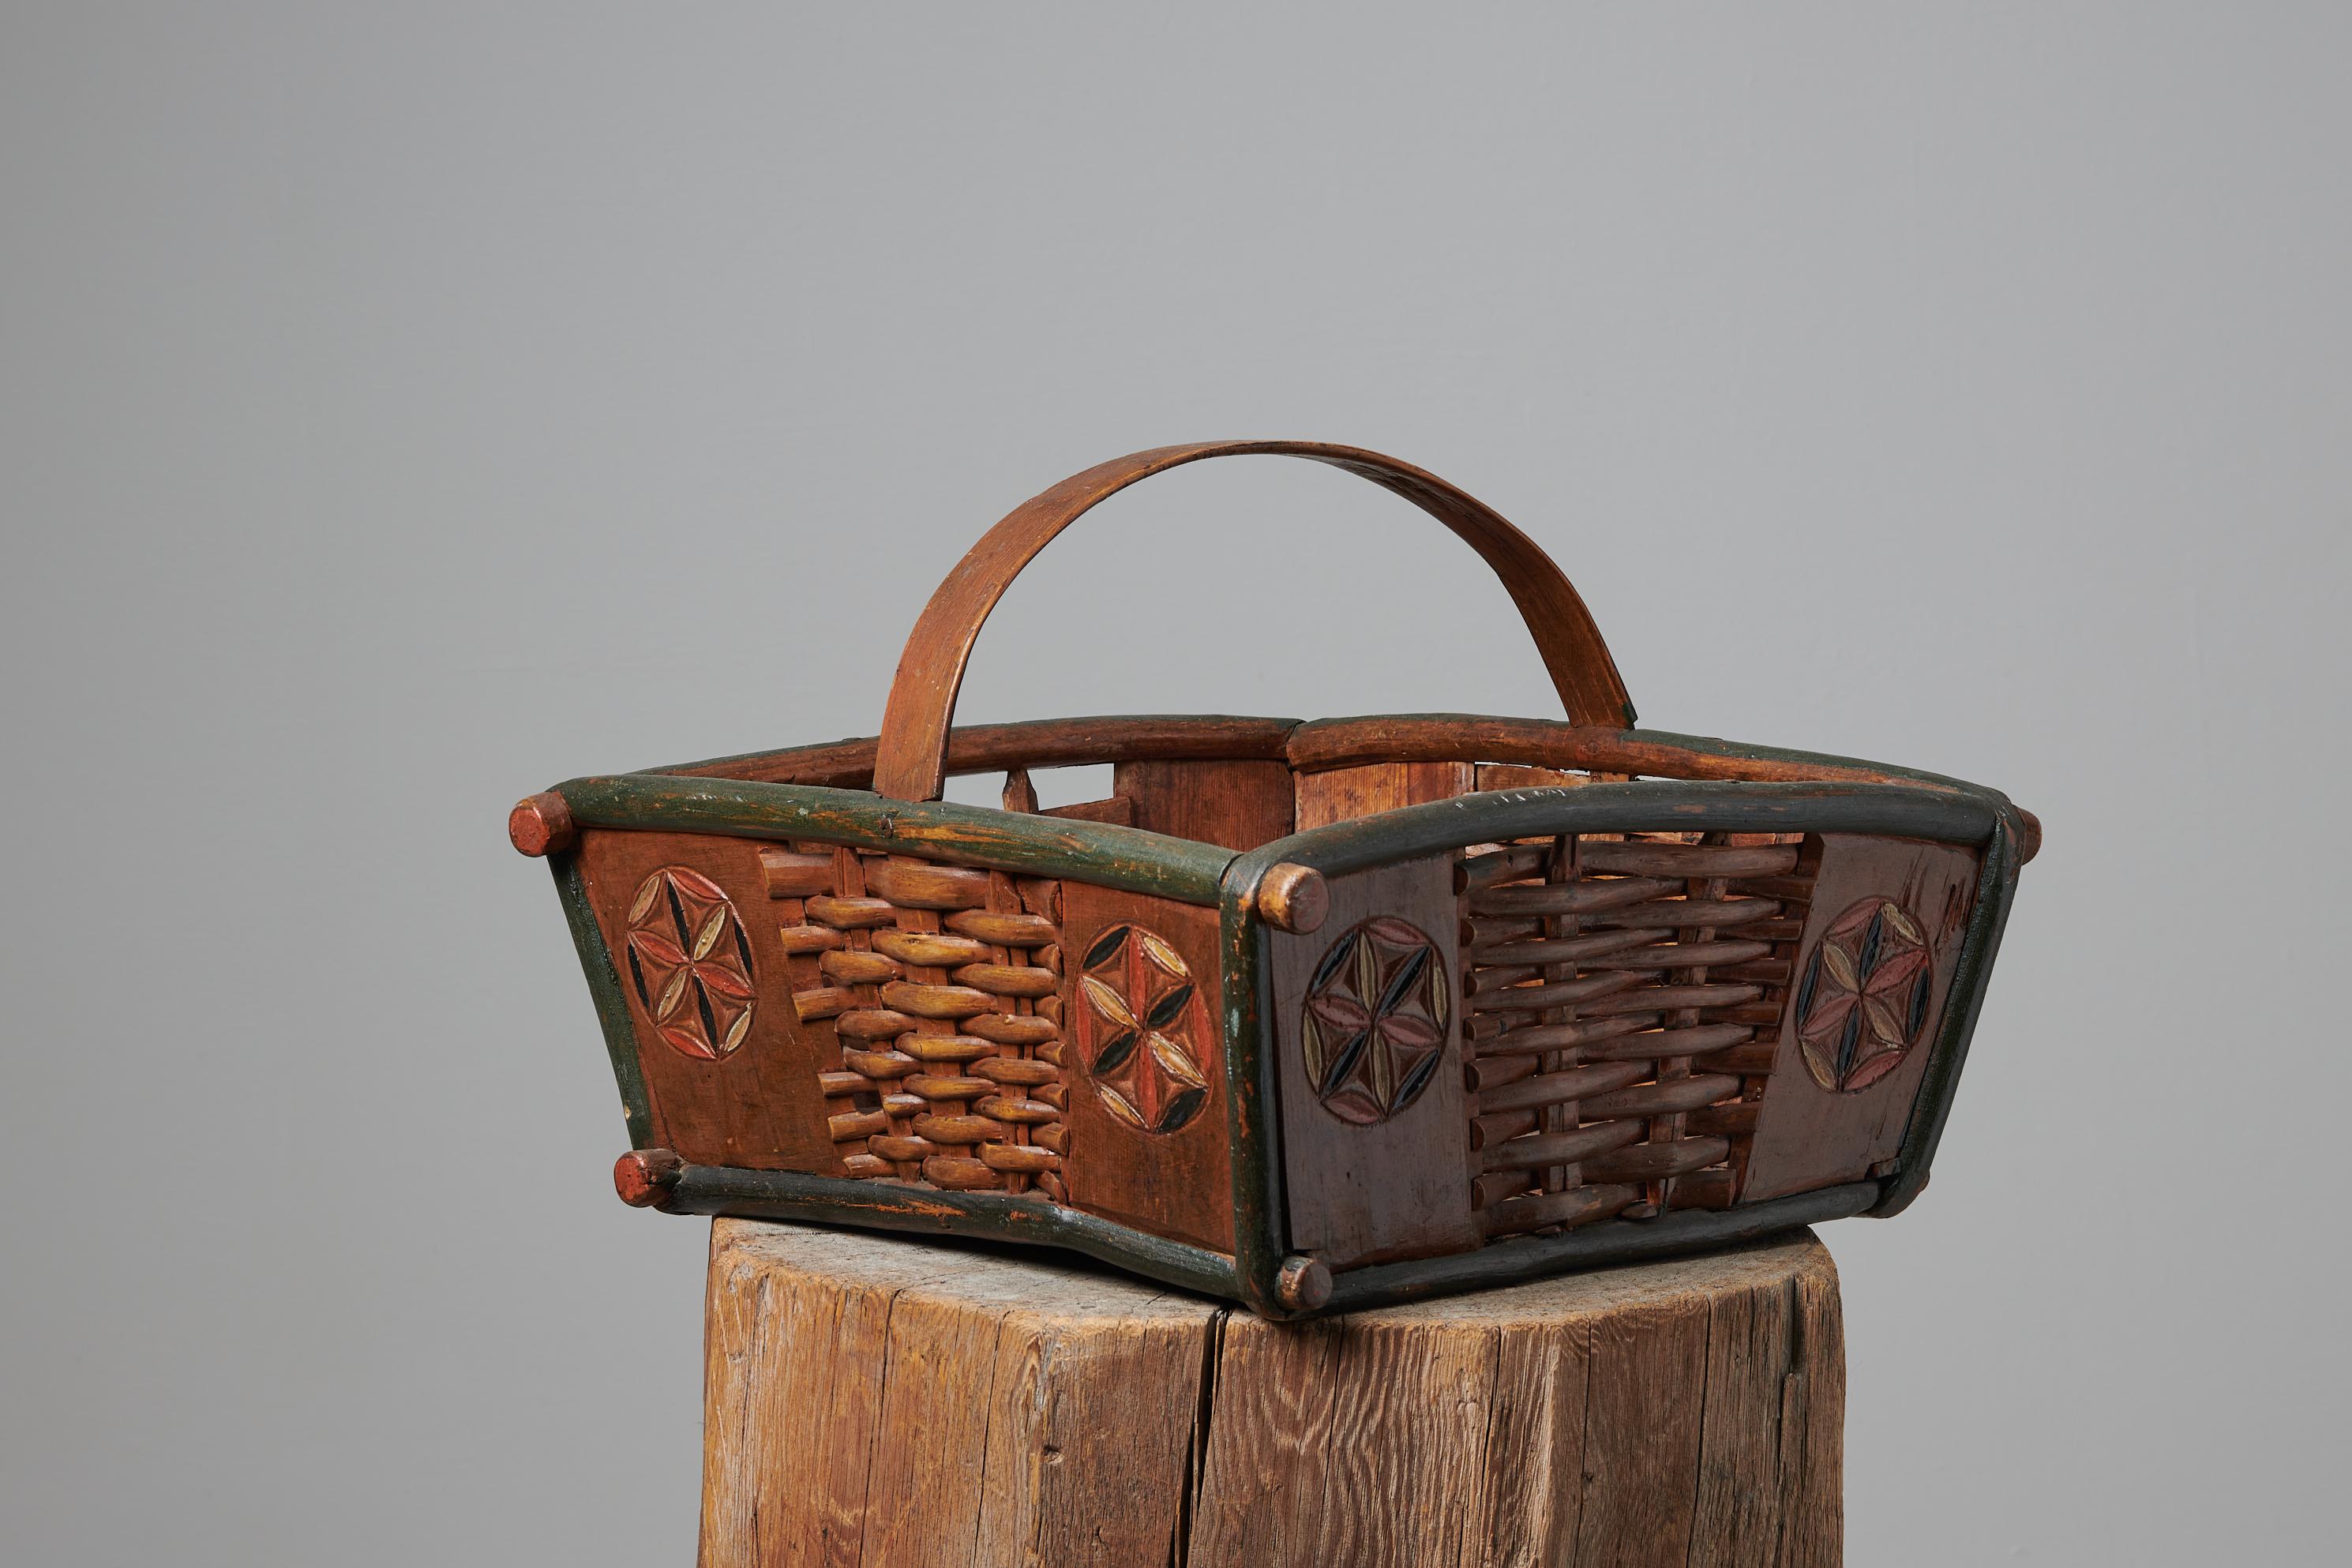 Antique folk art basket from northern Sweden made during the mid 19th century, around 1840. The basket is made by hand in pine and has the original paint as well as the original detailed decor. Good vintage condition with some traces of use which